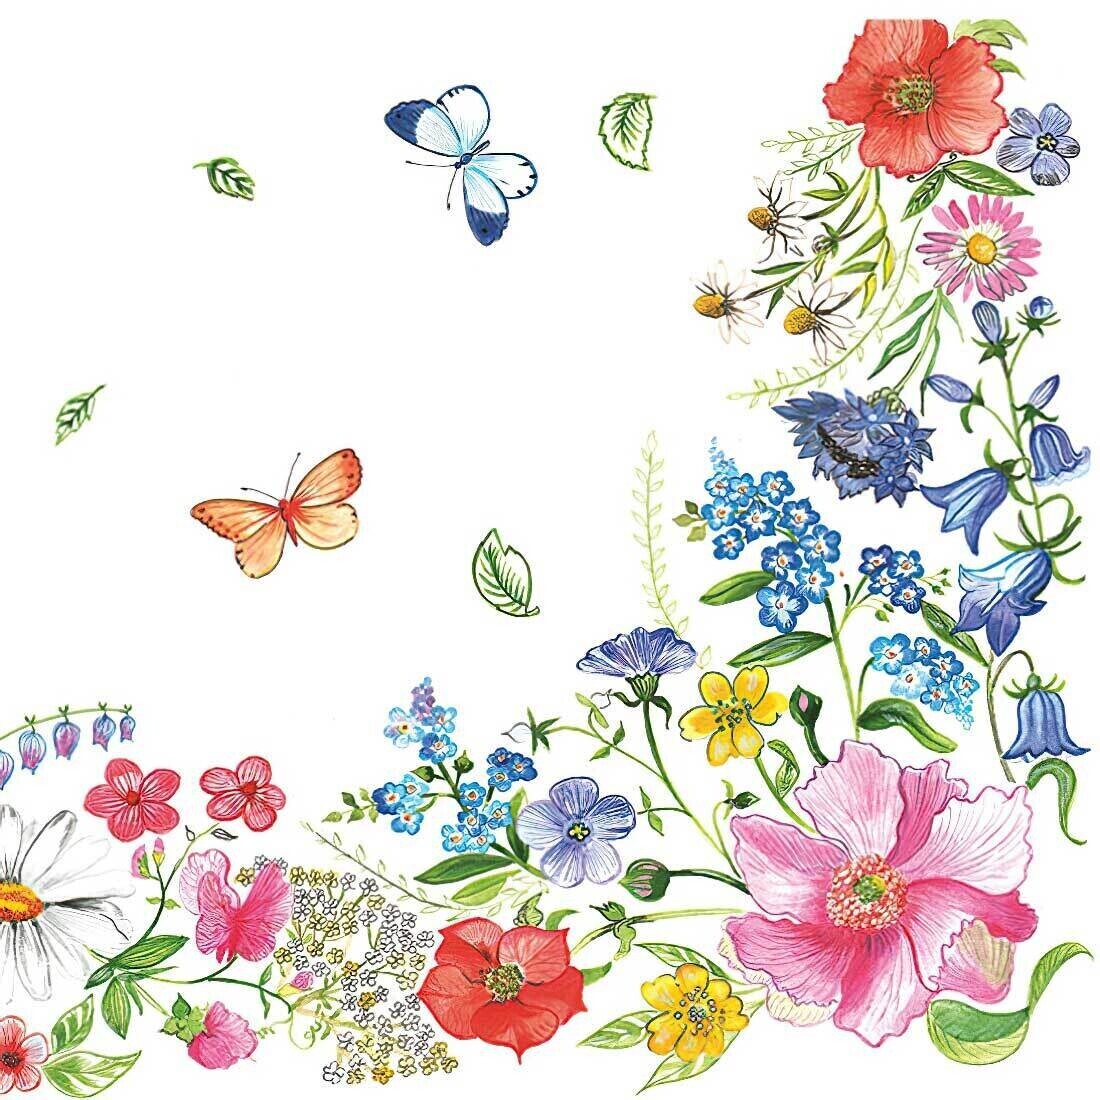 Decoupage Paper Napkins - Butterflies - Blossom Border (1 Sheet) Out of Stock